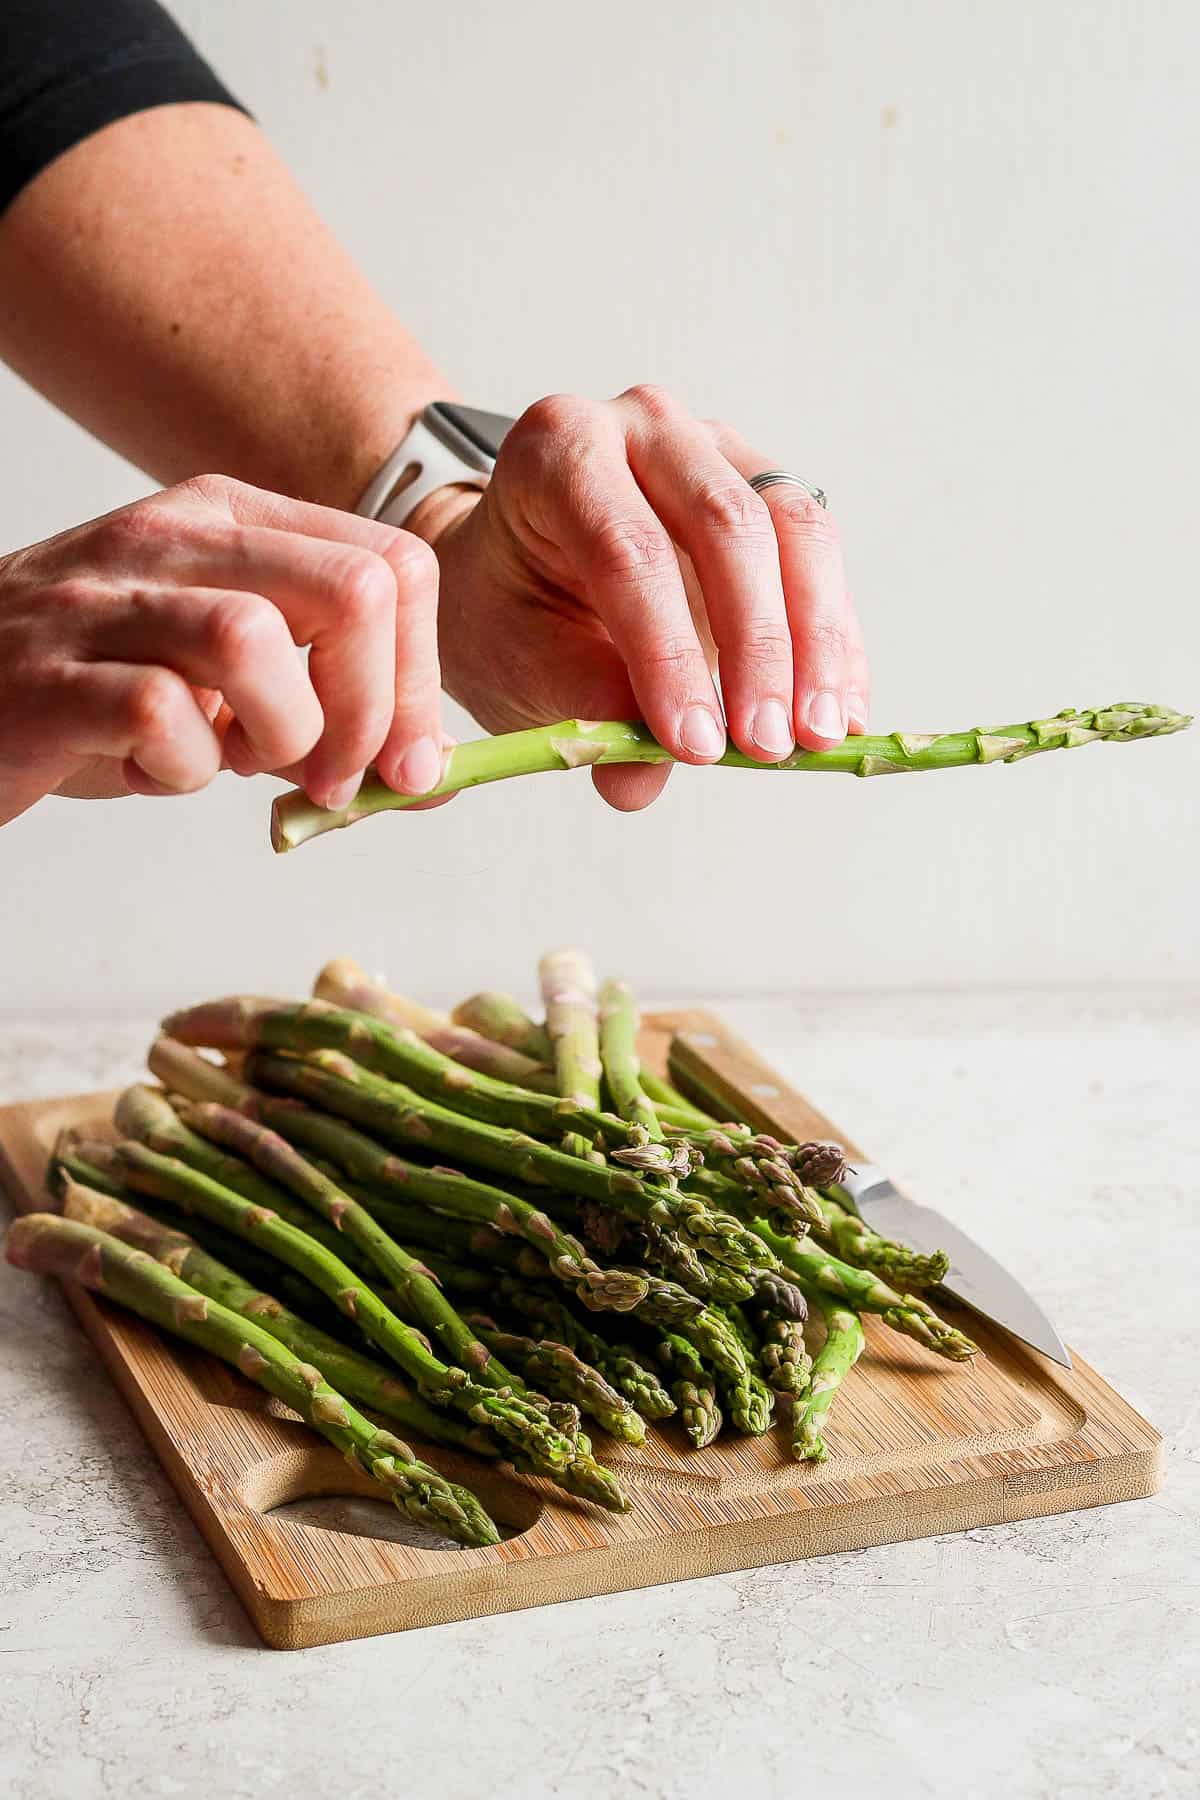 Two hands holding one piece of asparagus.